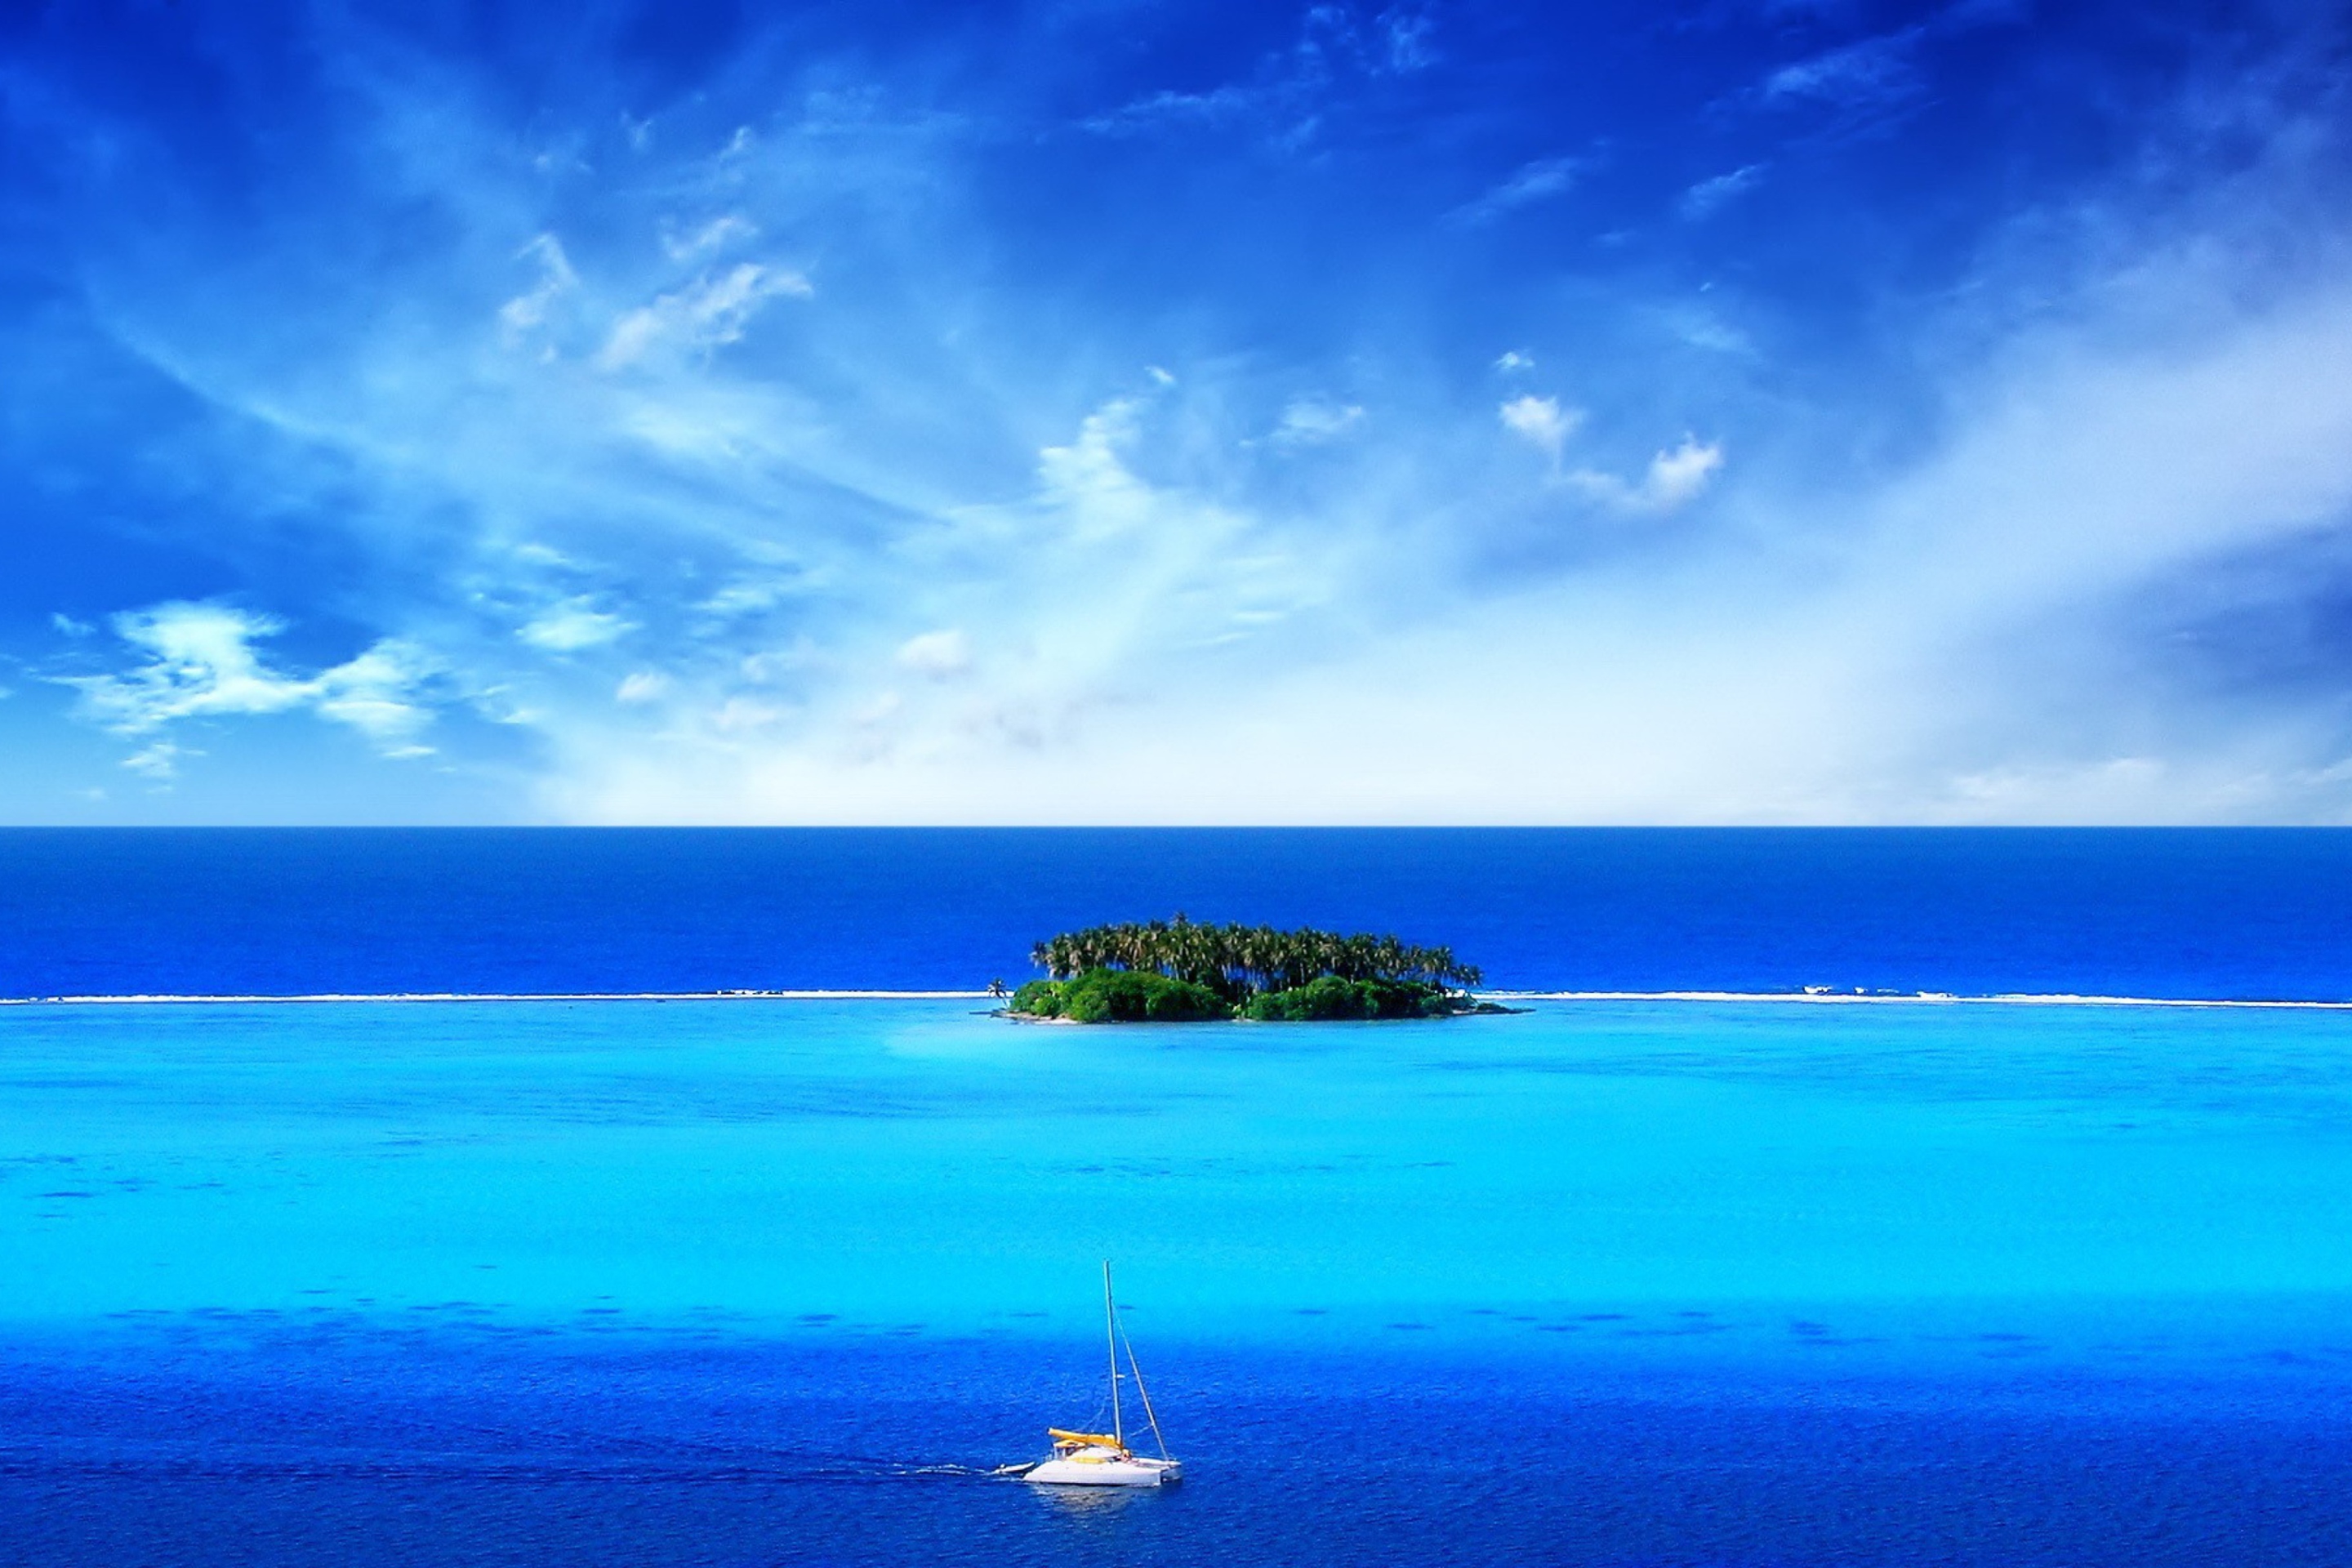 Green Island In Middle Of Blue Ocean And White Boat screenshot #1 2880x1920